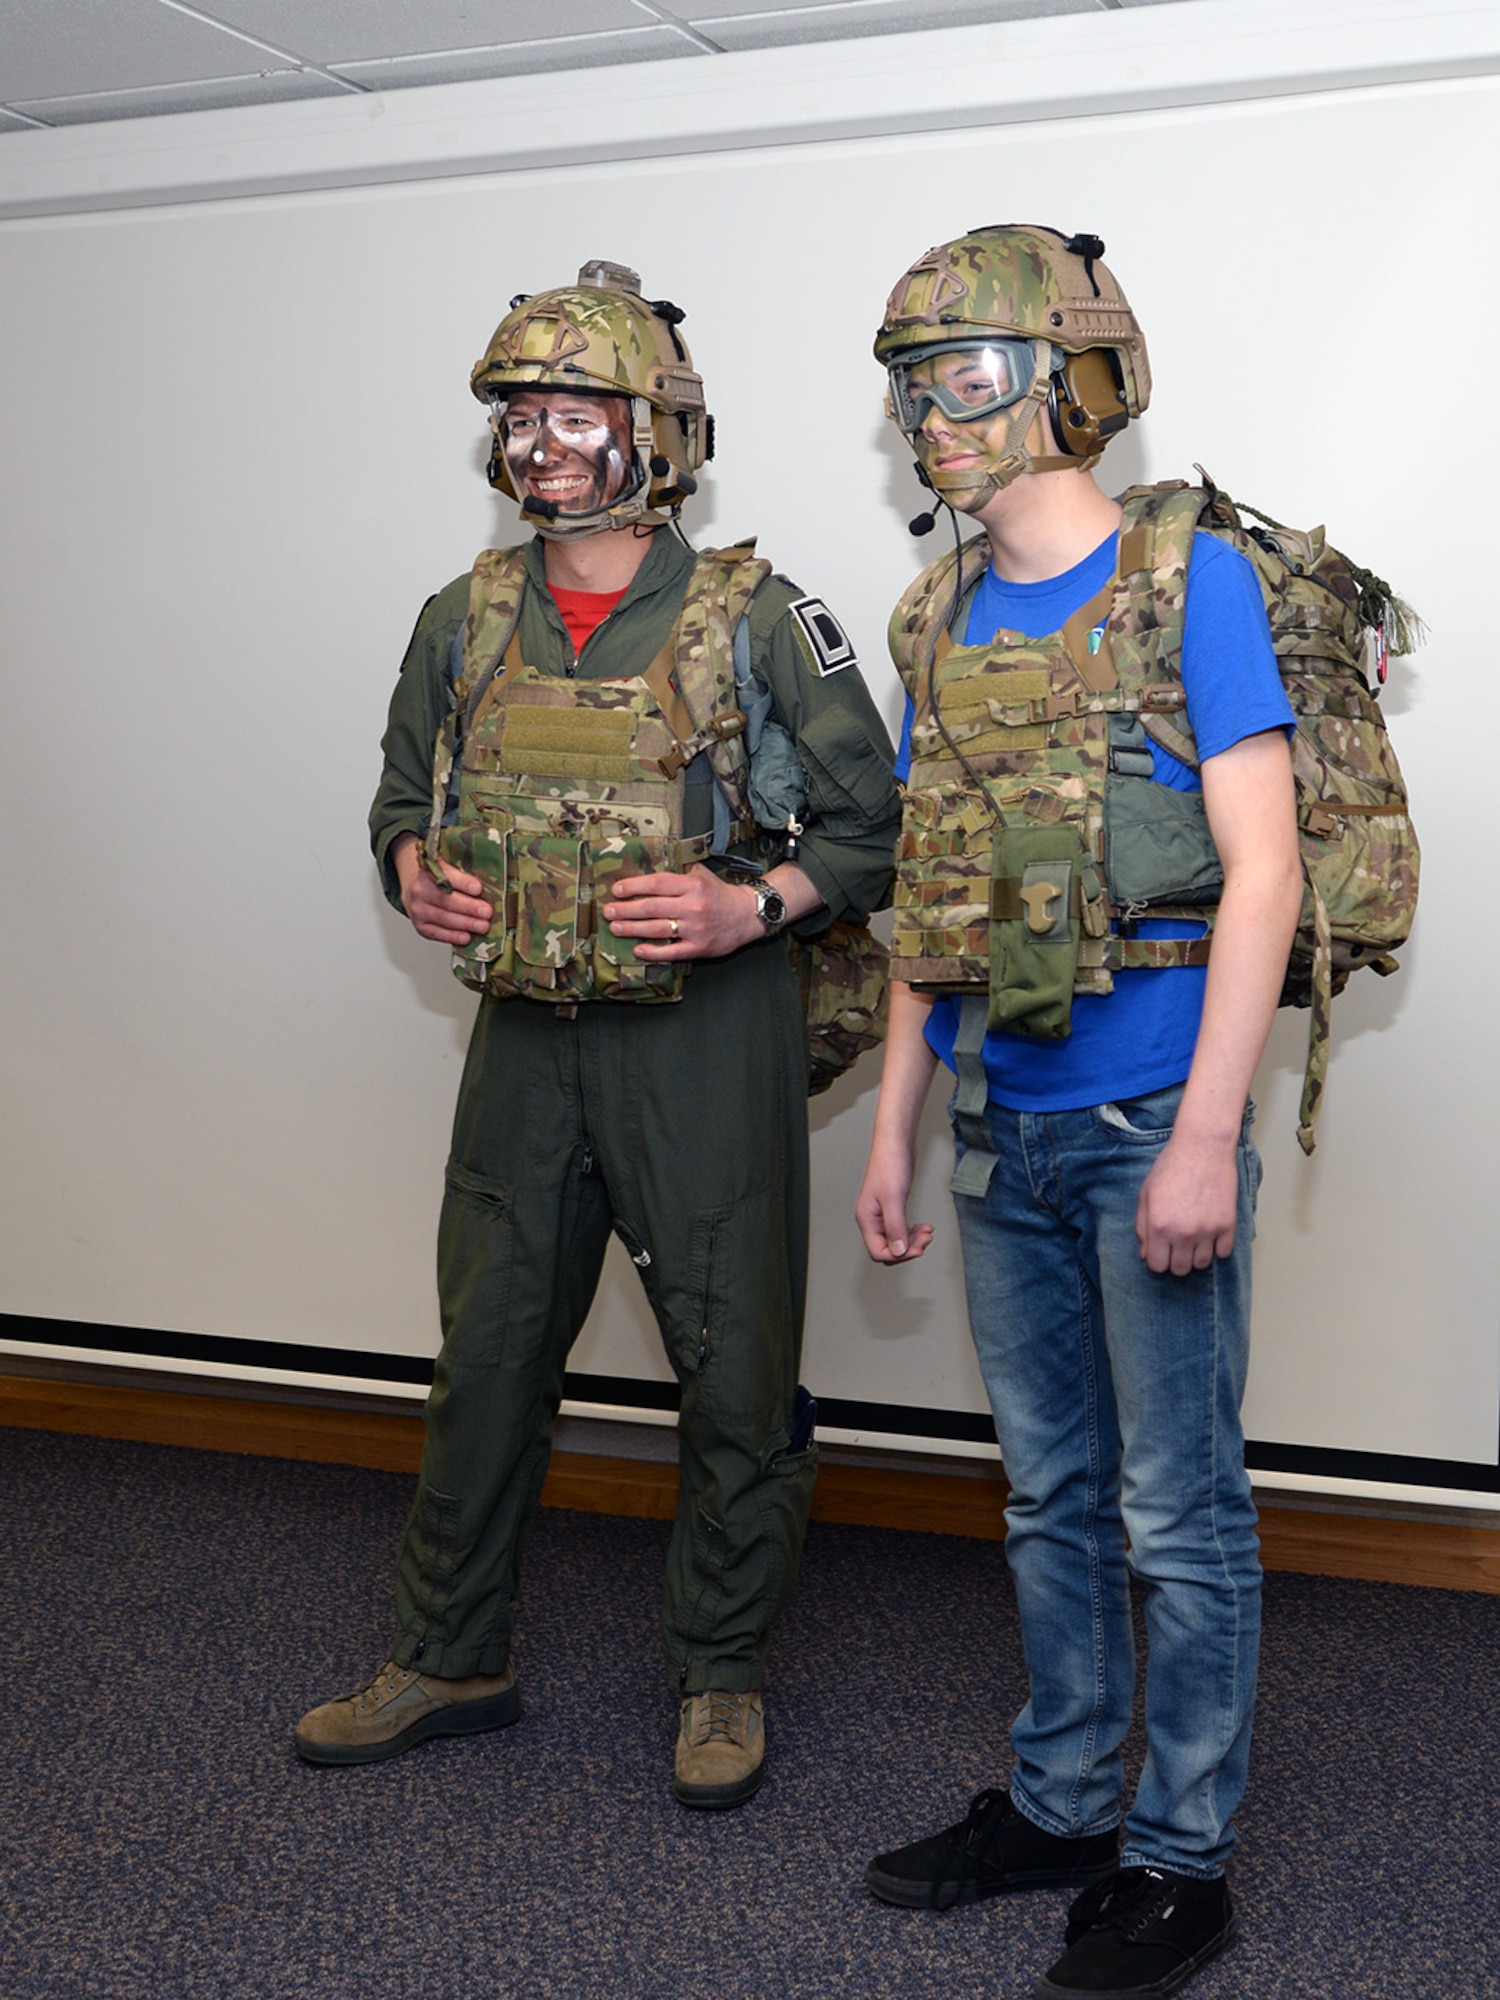 U.S Air Force Lt Col. Jason Barnes, left, 351st Air Refueling Squadron commander, and his son Ian, 13, pose for a photo after being dressed in survival, evasion, resistance and escape gear during a demonstration at the “Bring Your Child to Work Day” for Month of the Military Child April 28, 2017, at the 100th Operations Group on RAF Mildenhall, England. In addition to hanging out with their parents at work, children had the opportunity to see a KC-135 Stratotanker close up, listen to some kid-friendly briefings, participate in physical training and take part in SERE training. (U.S. Air Force photo by Karen Abeyasekere)